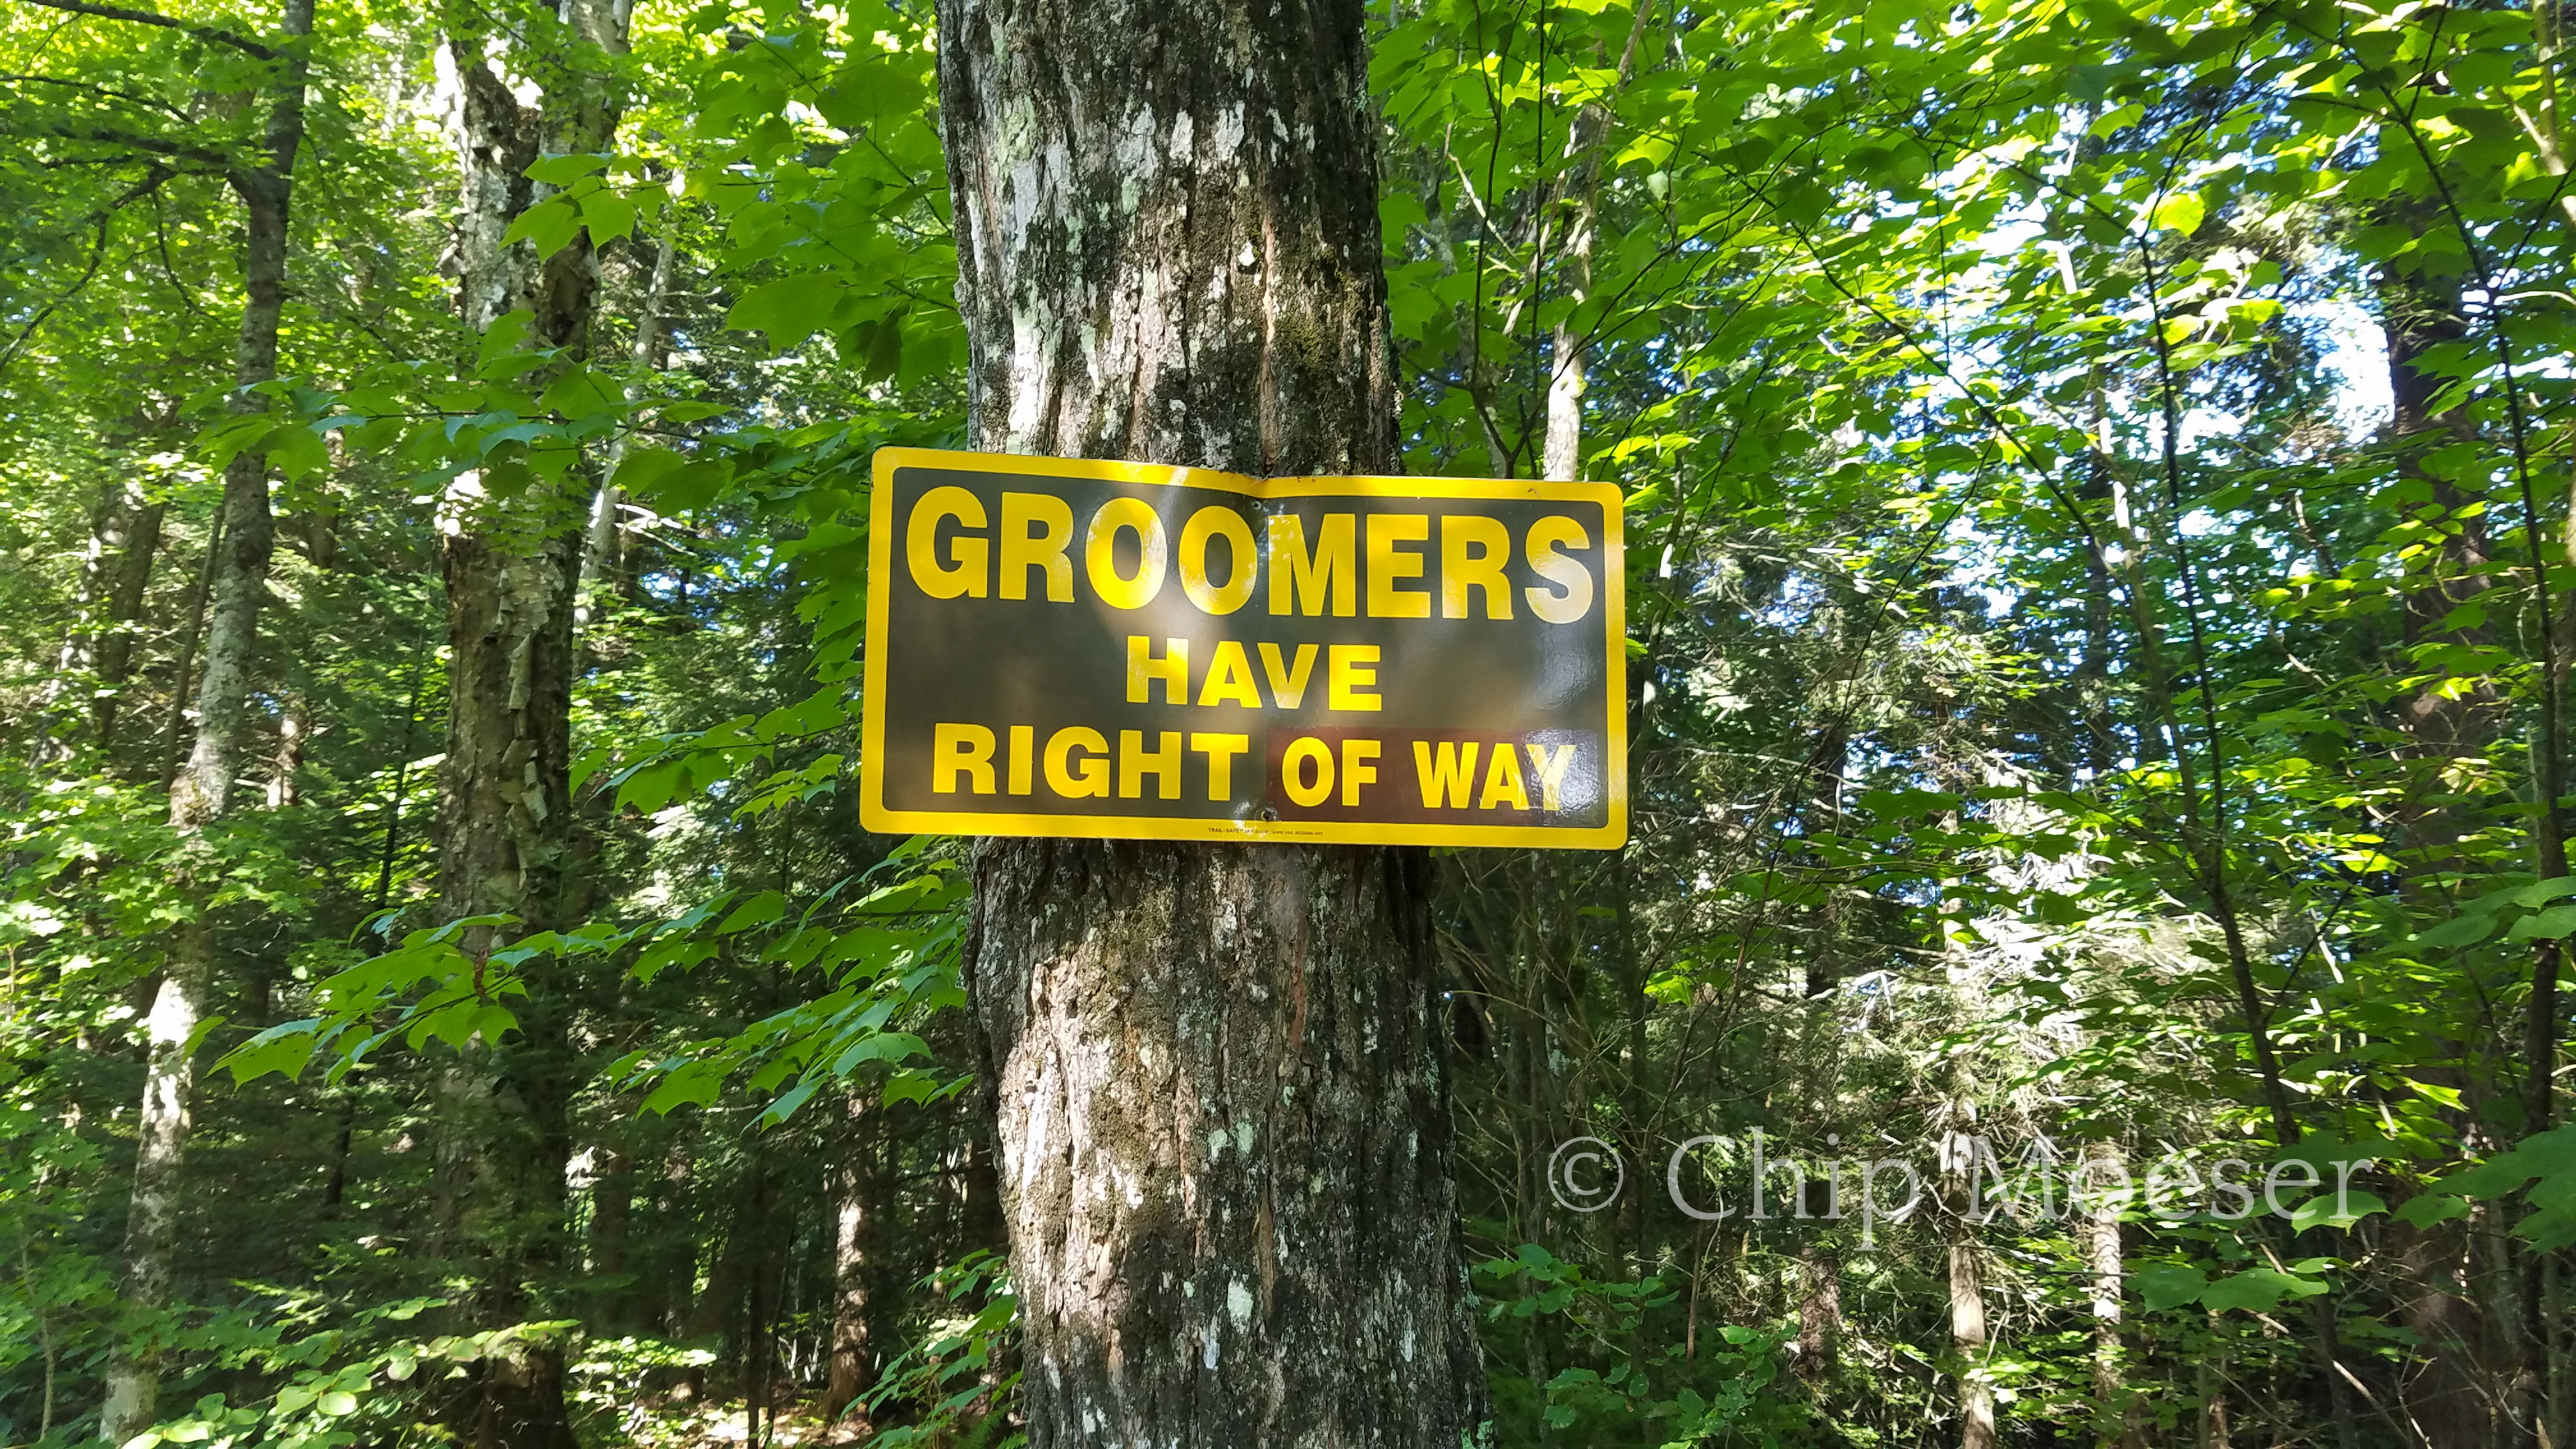 Groomers have right of way